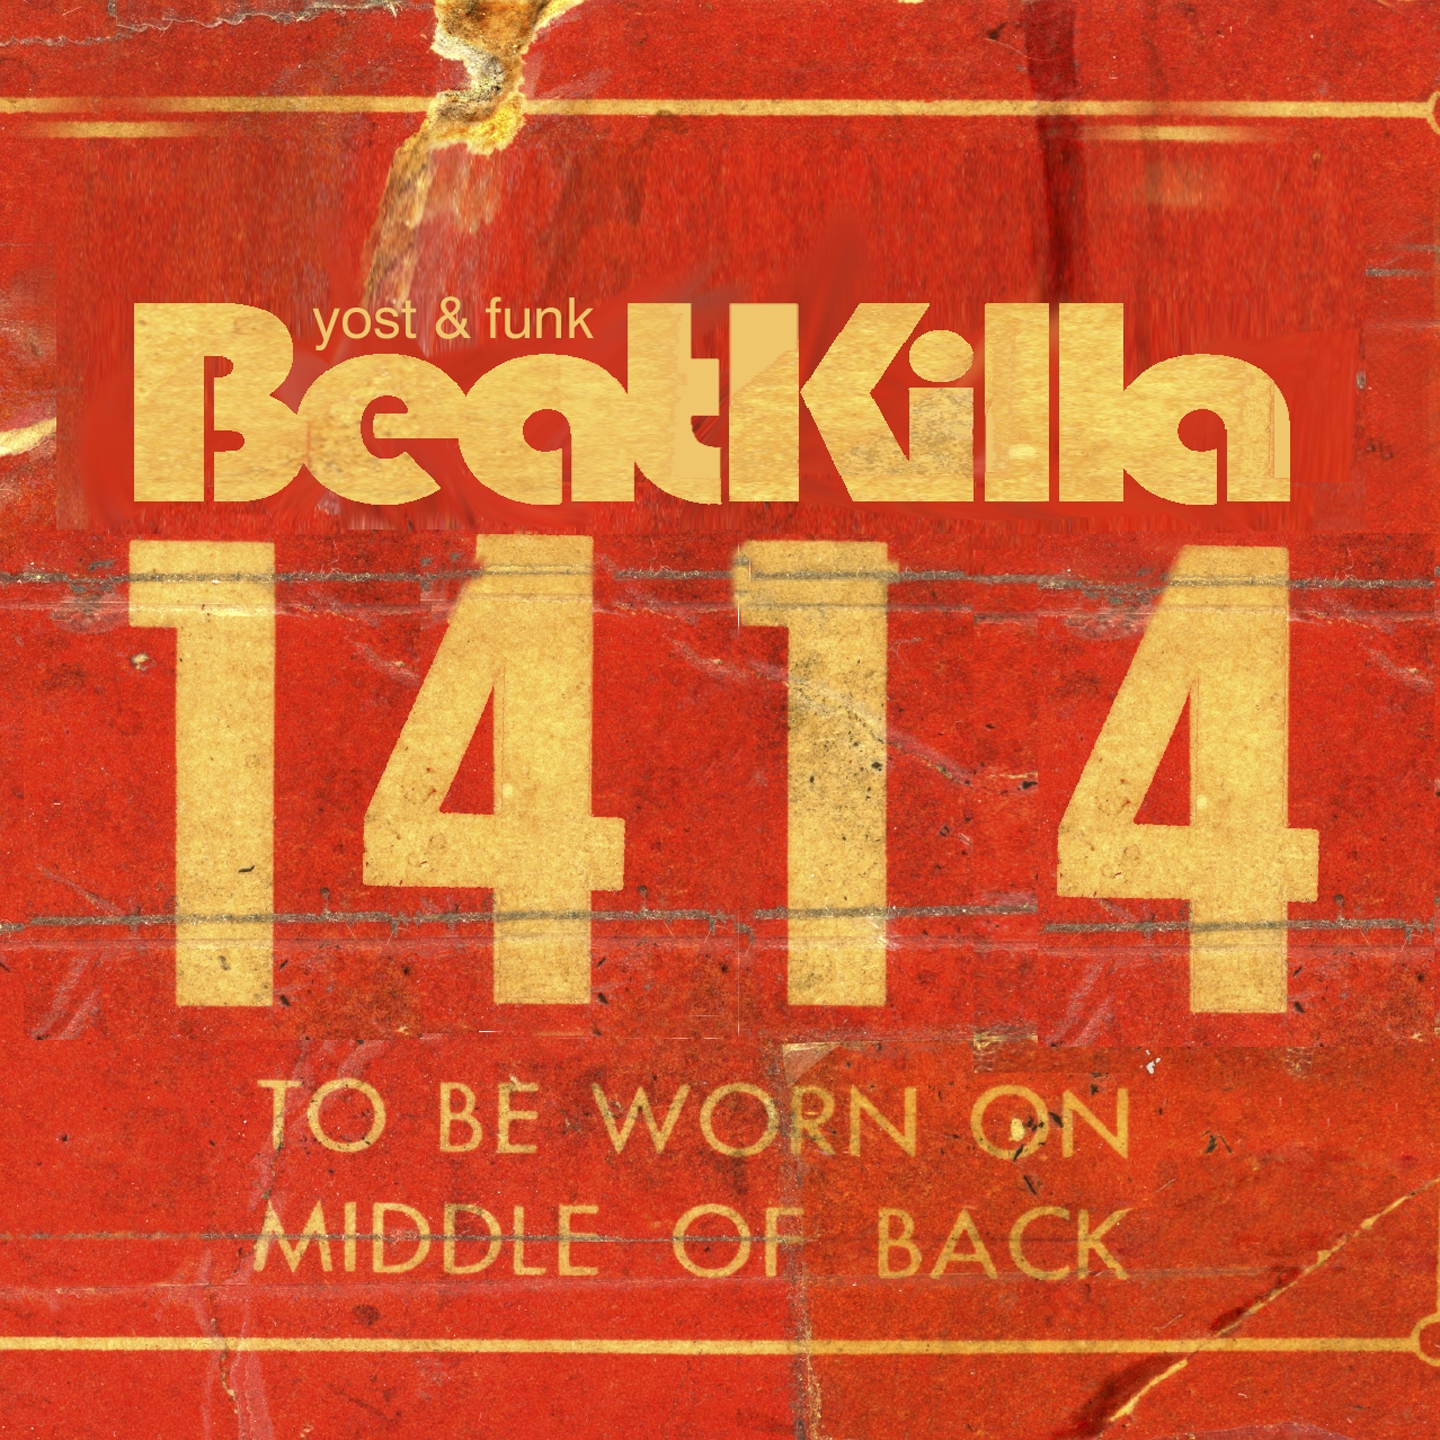 Beatkilla 1414: To Be Worn on Middle of Back